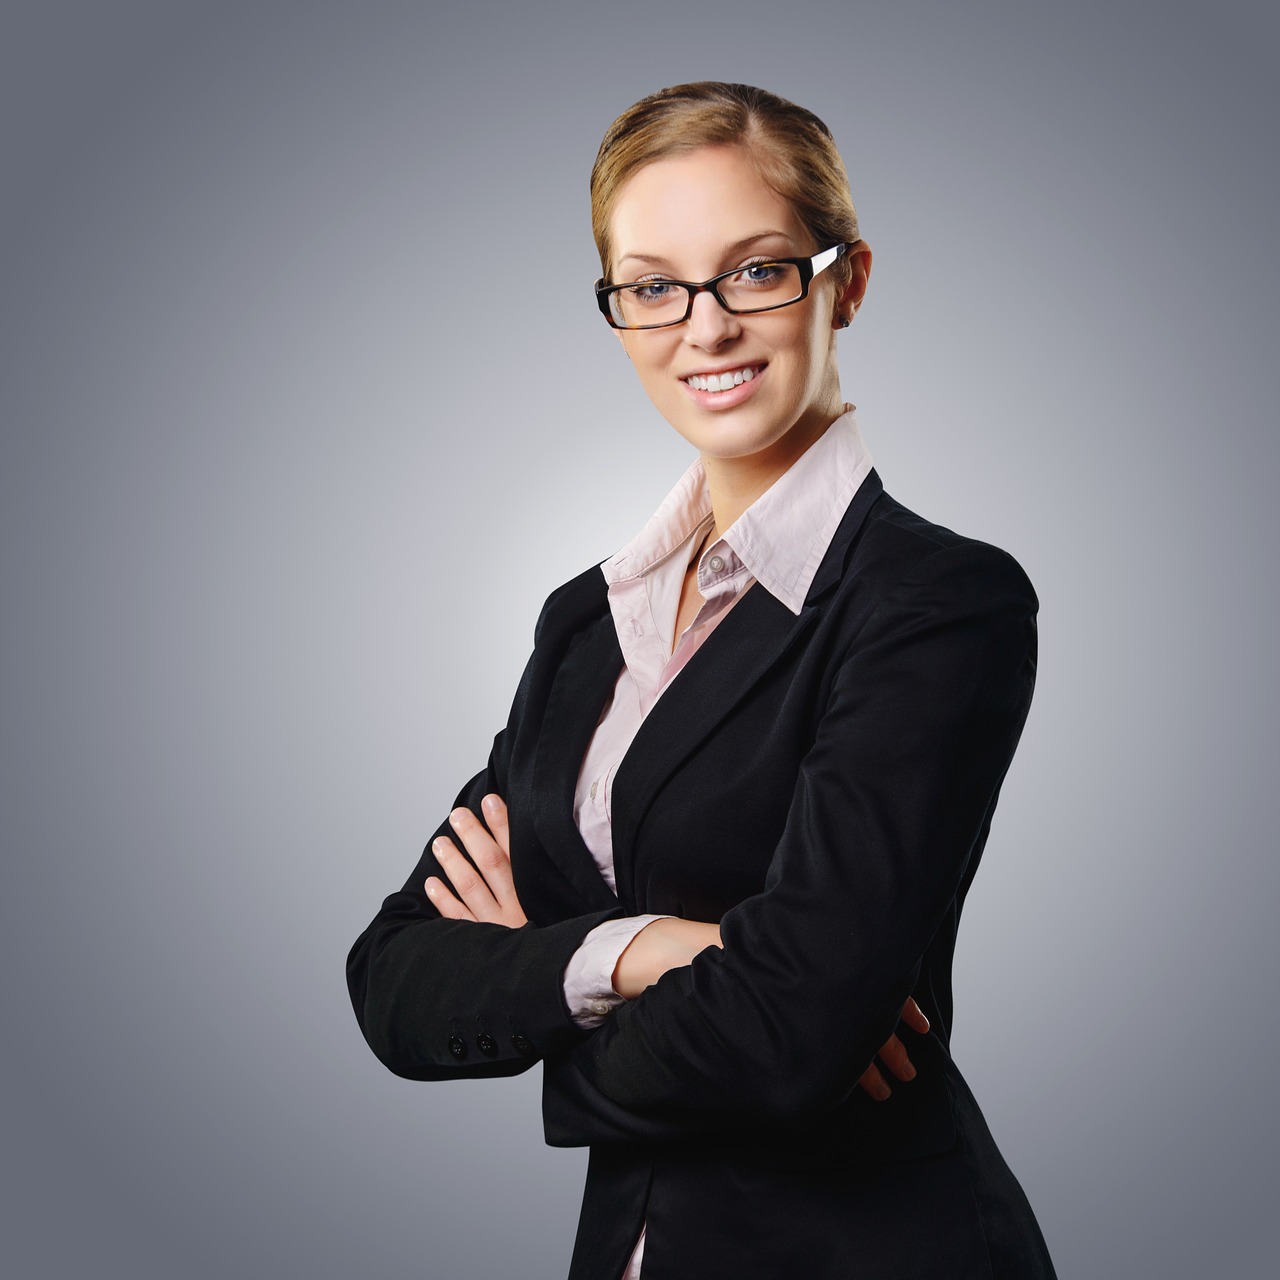 Image - real business female person people